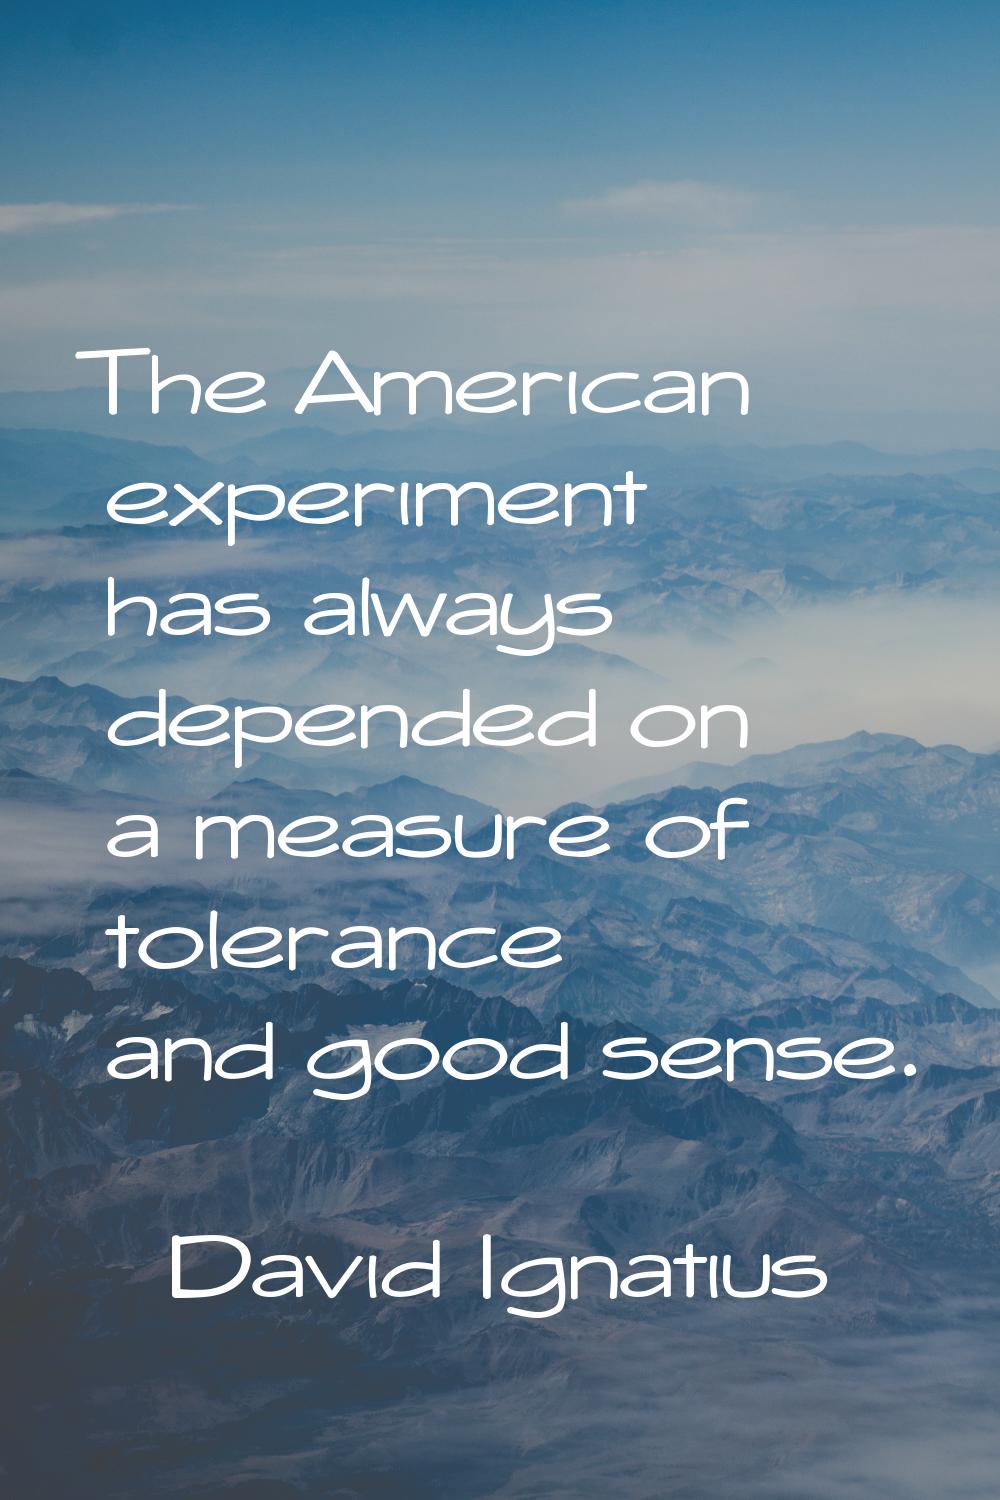 The American experiment has always depended on a measure of tolerance and good sense.